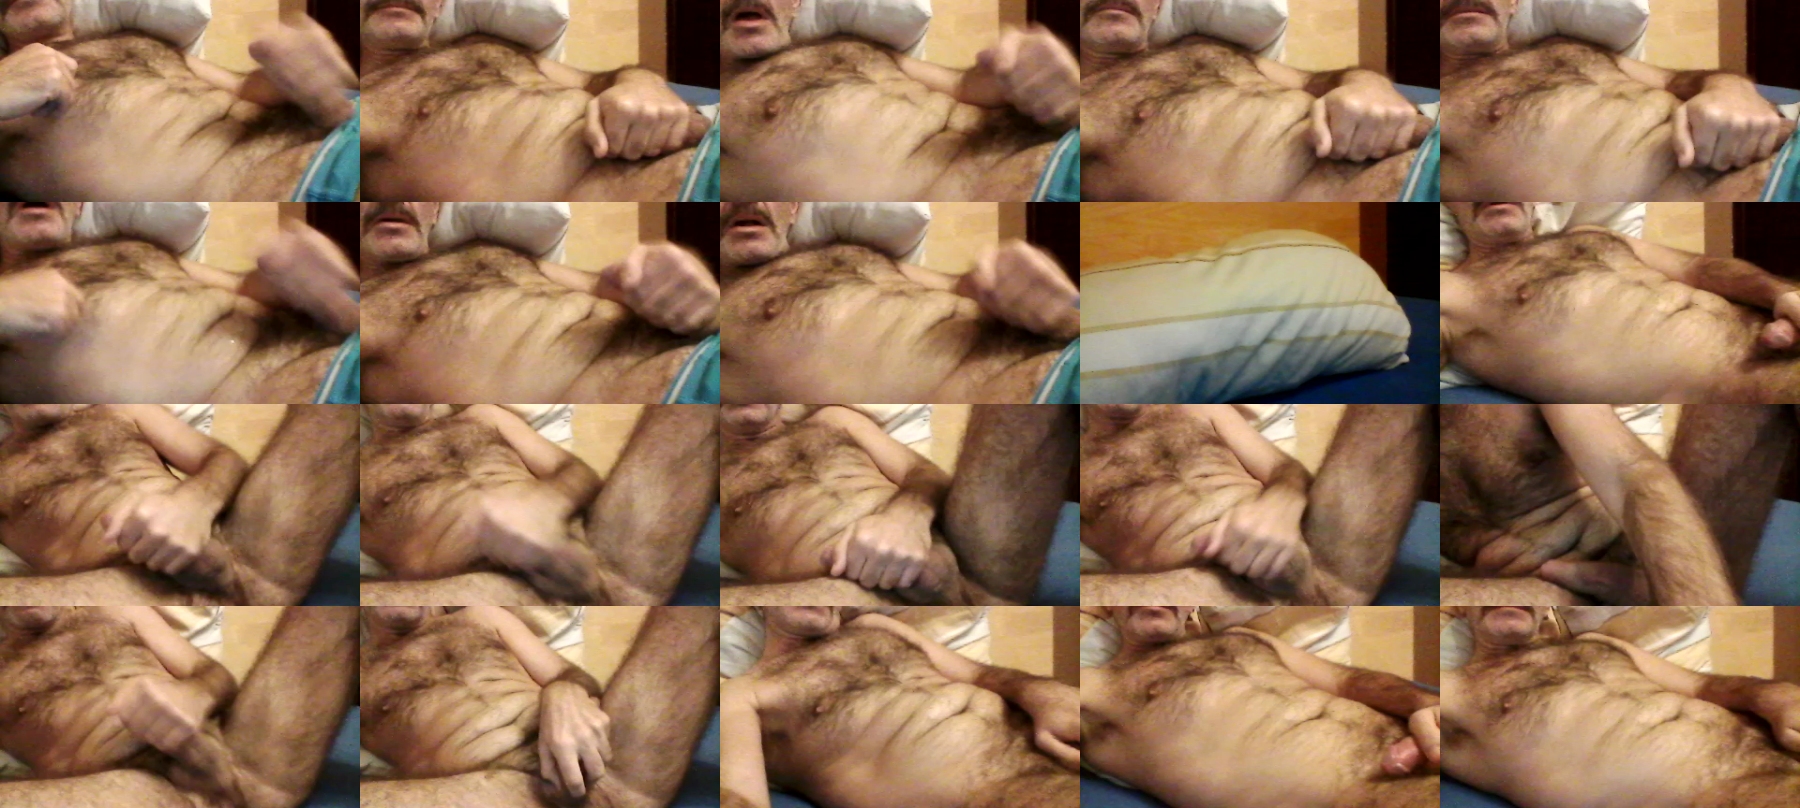 johnguy32  08-12-2021 Recorded Video Nude